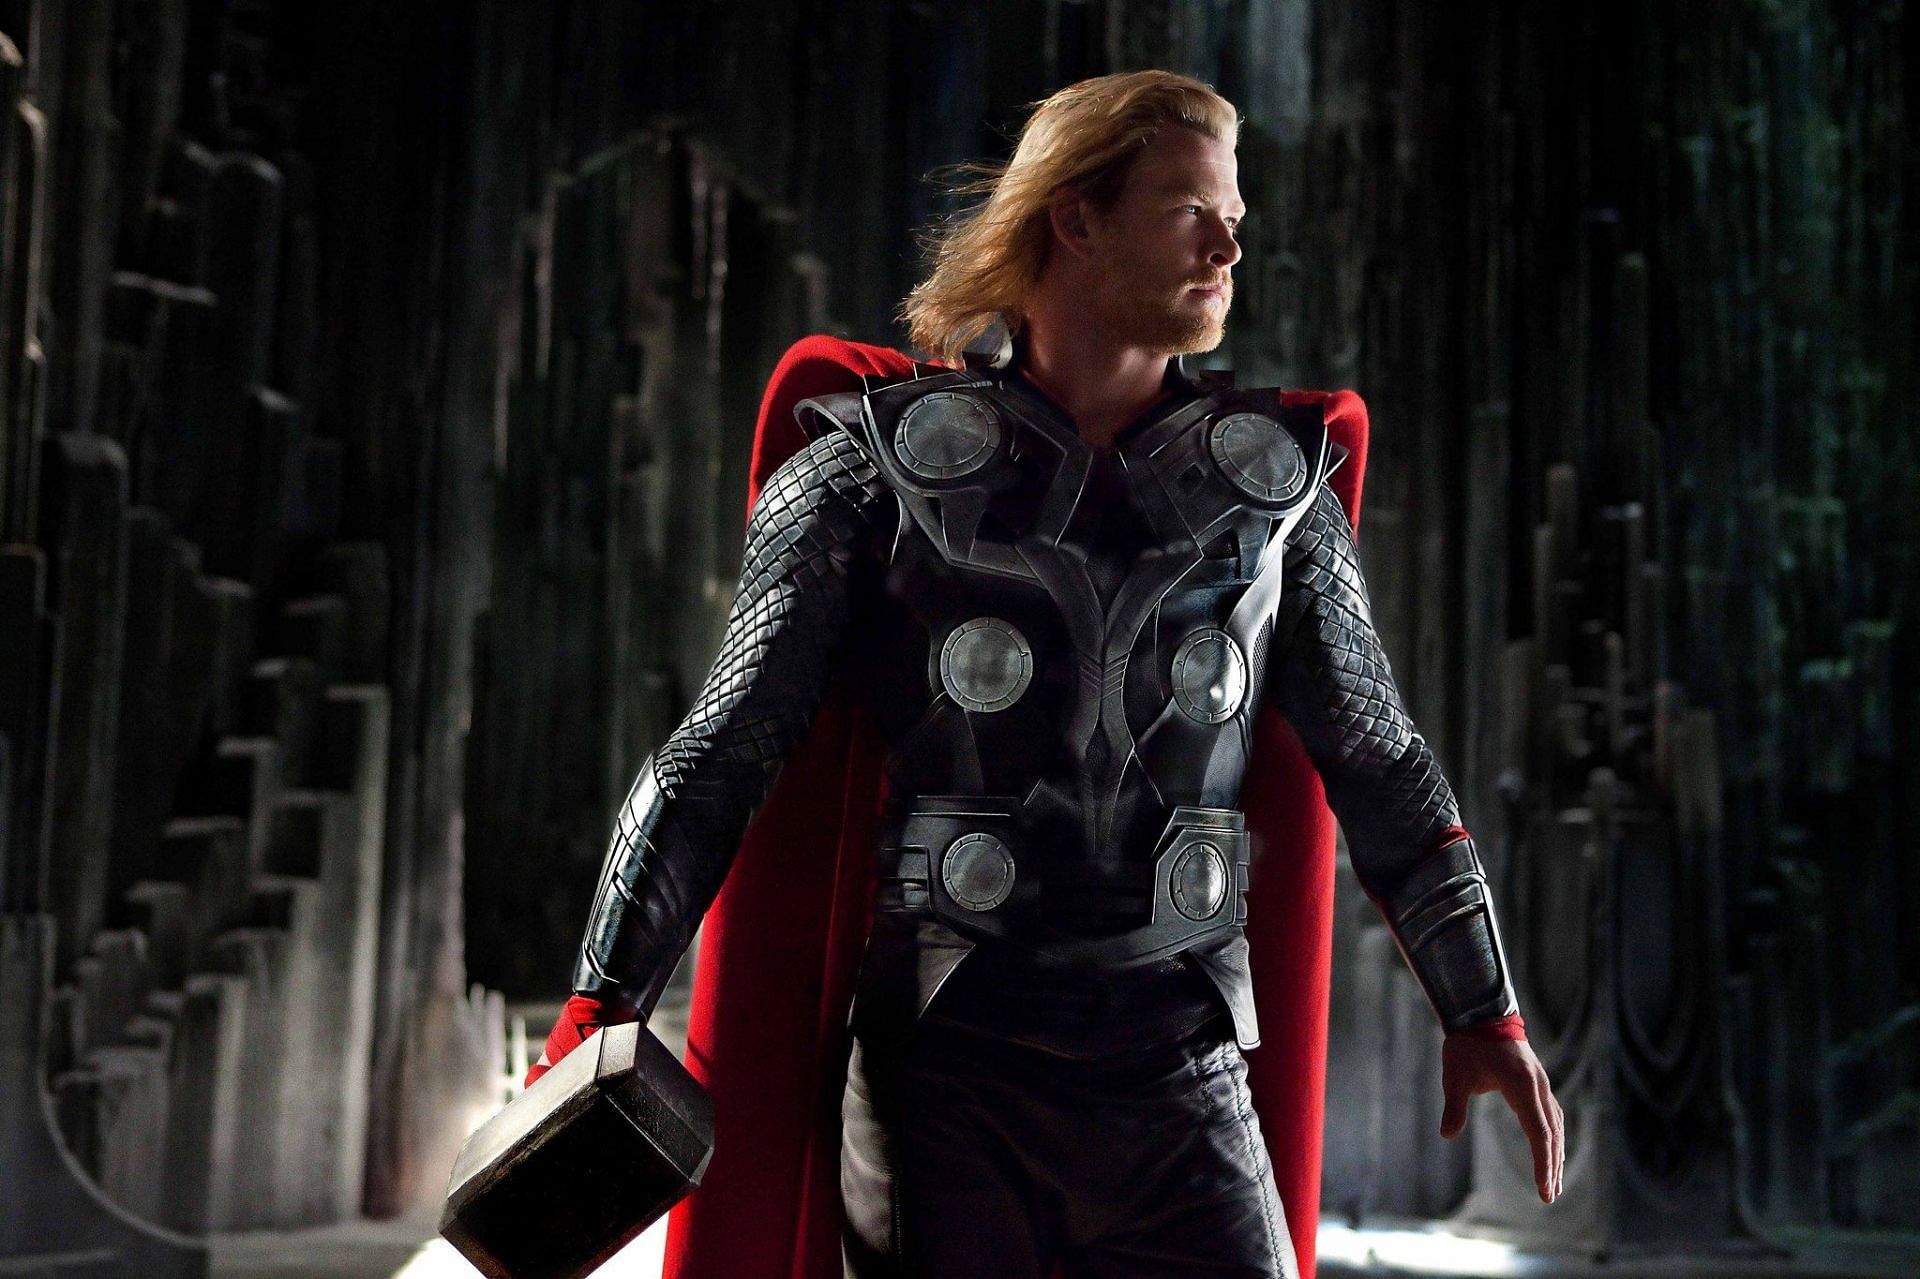 The Norse God - Thor possesses incredible strength, durability, and the ability to control lightning, making him nearly invulnerable and able to manipulate time and space (Image via Marvel Studios)